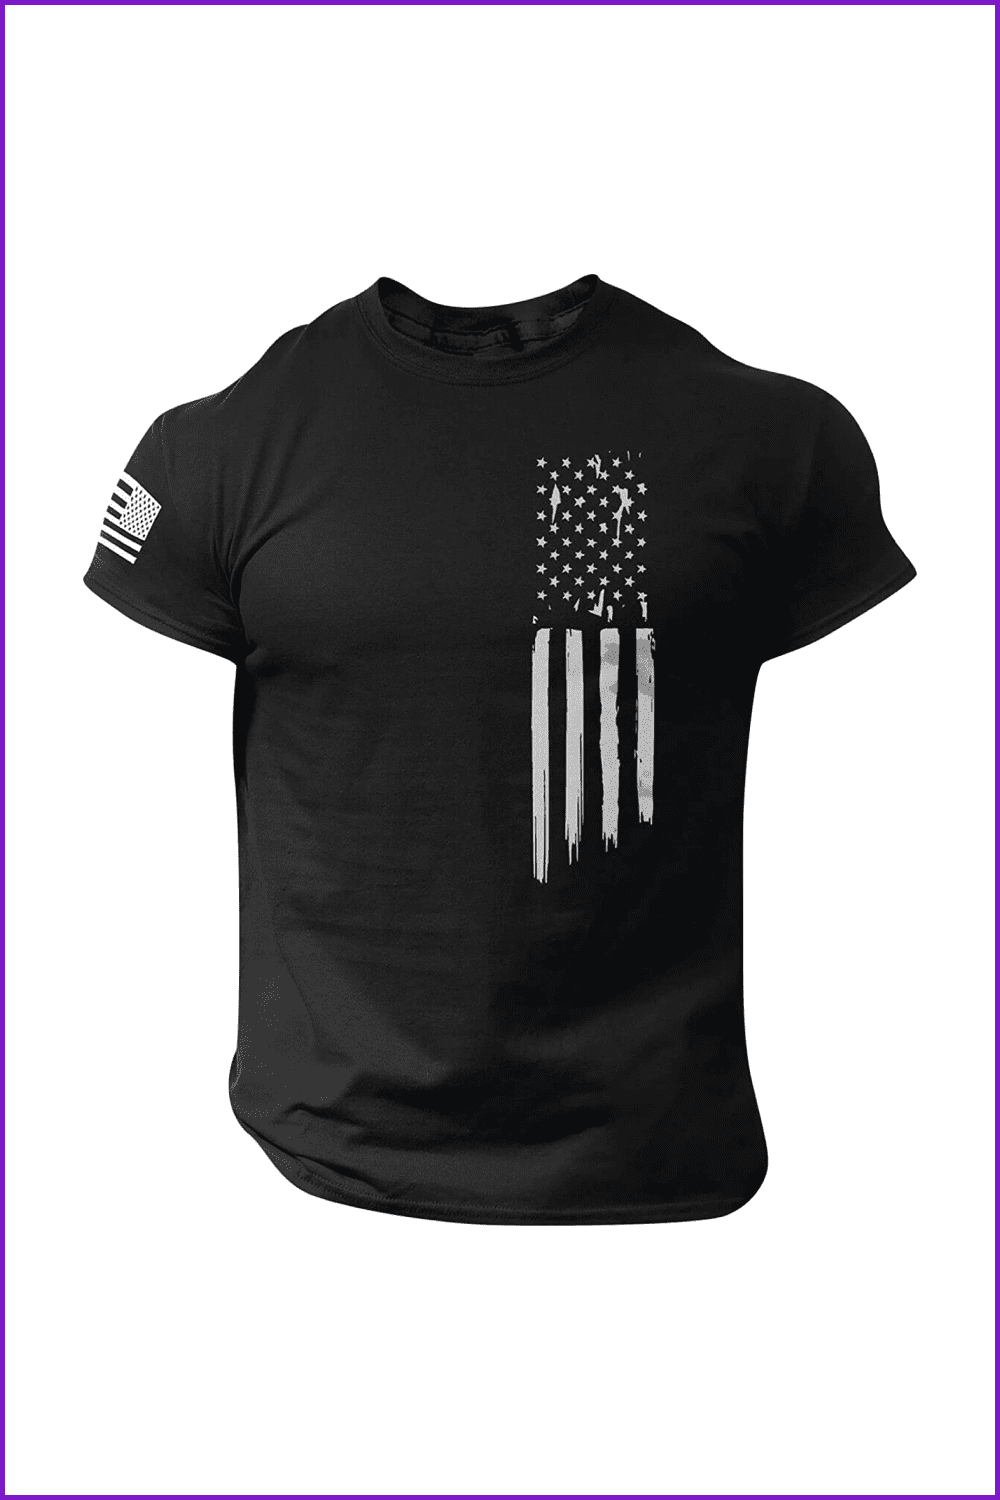 Mens Solid US Flag Shirt,Stars and Stripes Printed Lightweight T-Shirt Summer Casual Breathable Muscle Top.